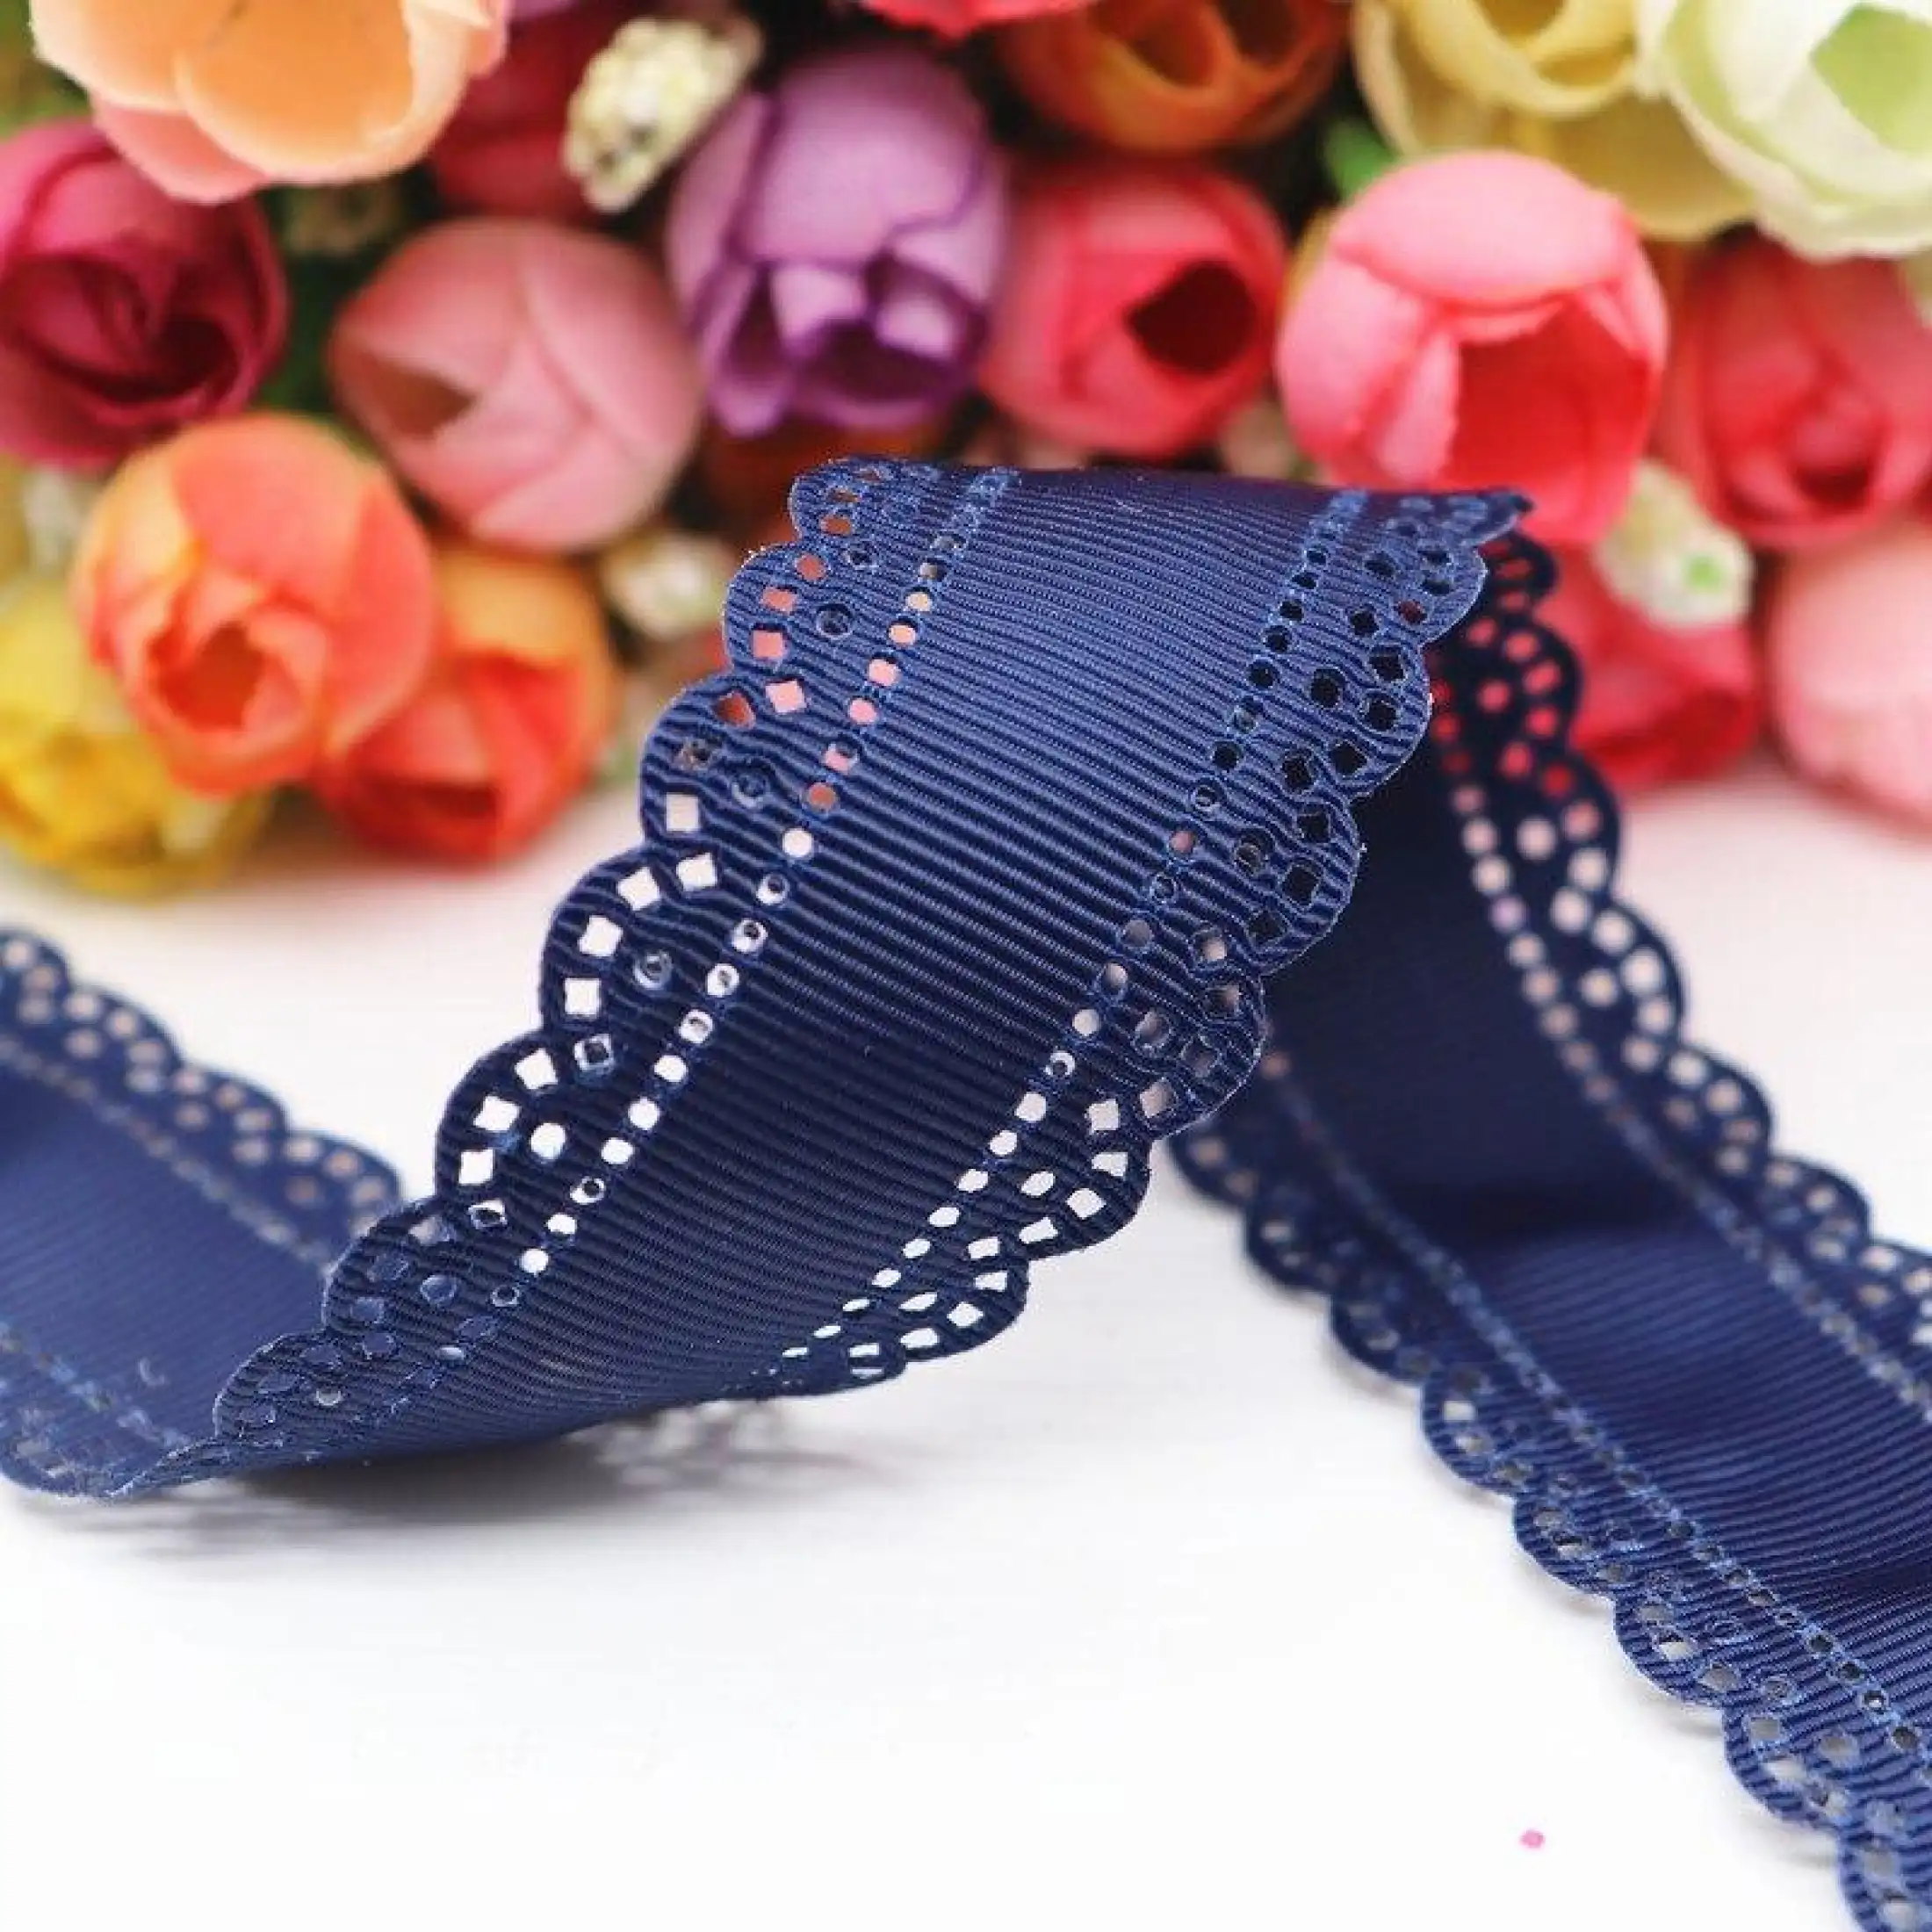 Hollow Flowers Solid Grosgrain Ribbons Cloth Tape Lace DIY Decoration 1 Yard